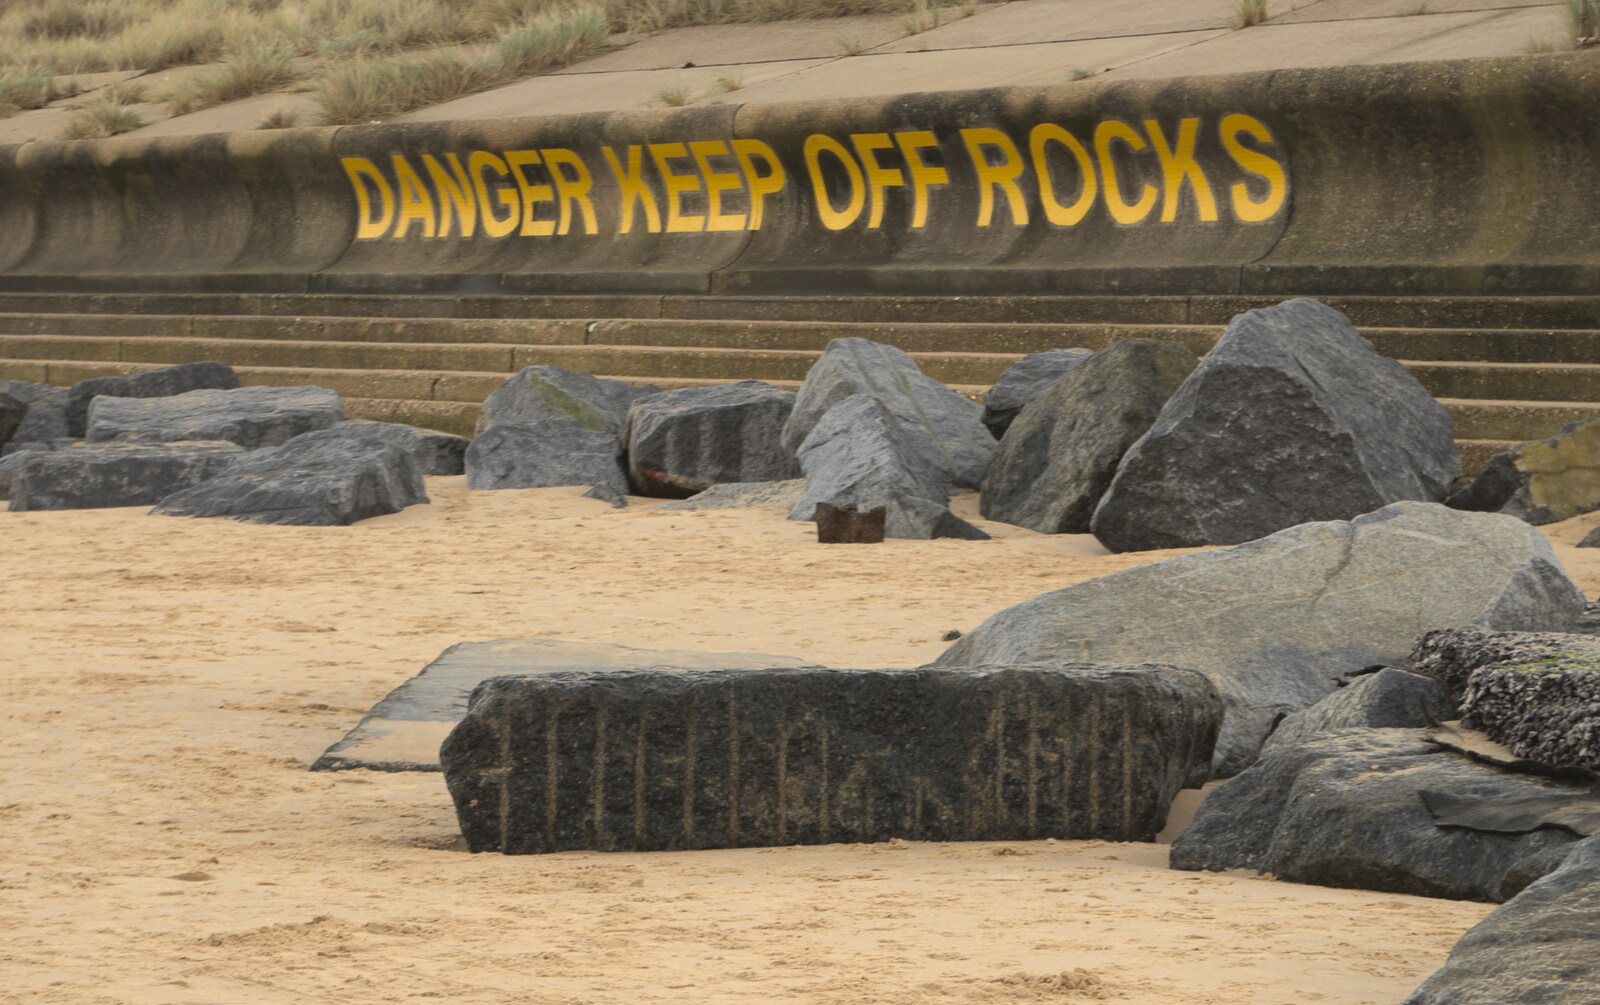 Another danger sign from Horsey Seals and Sea Palling, Norfolk Coast - 2nd January 2017